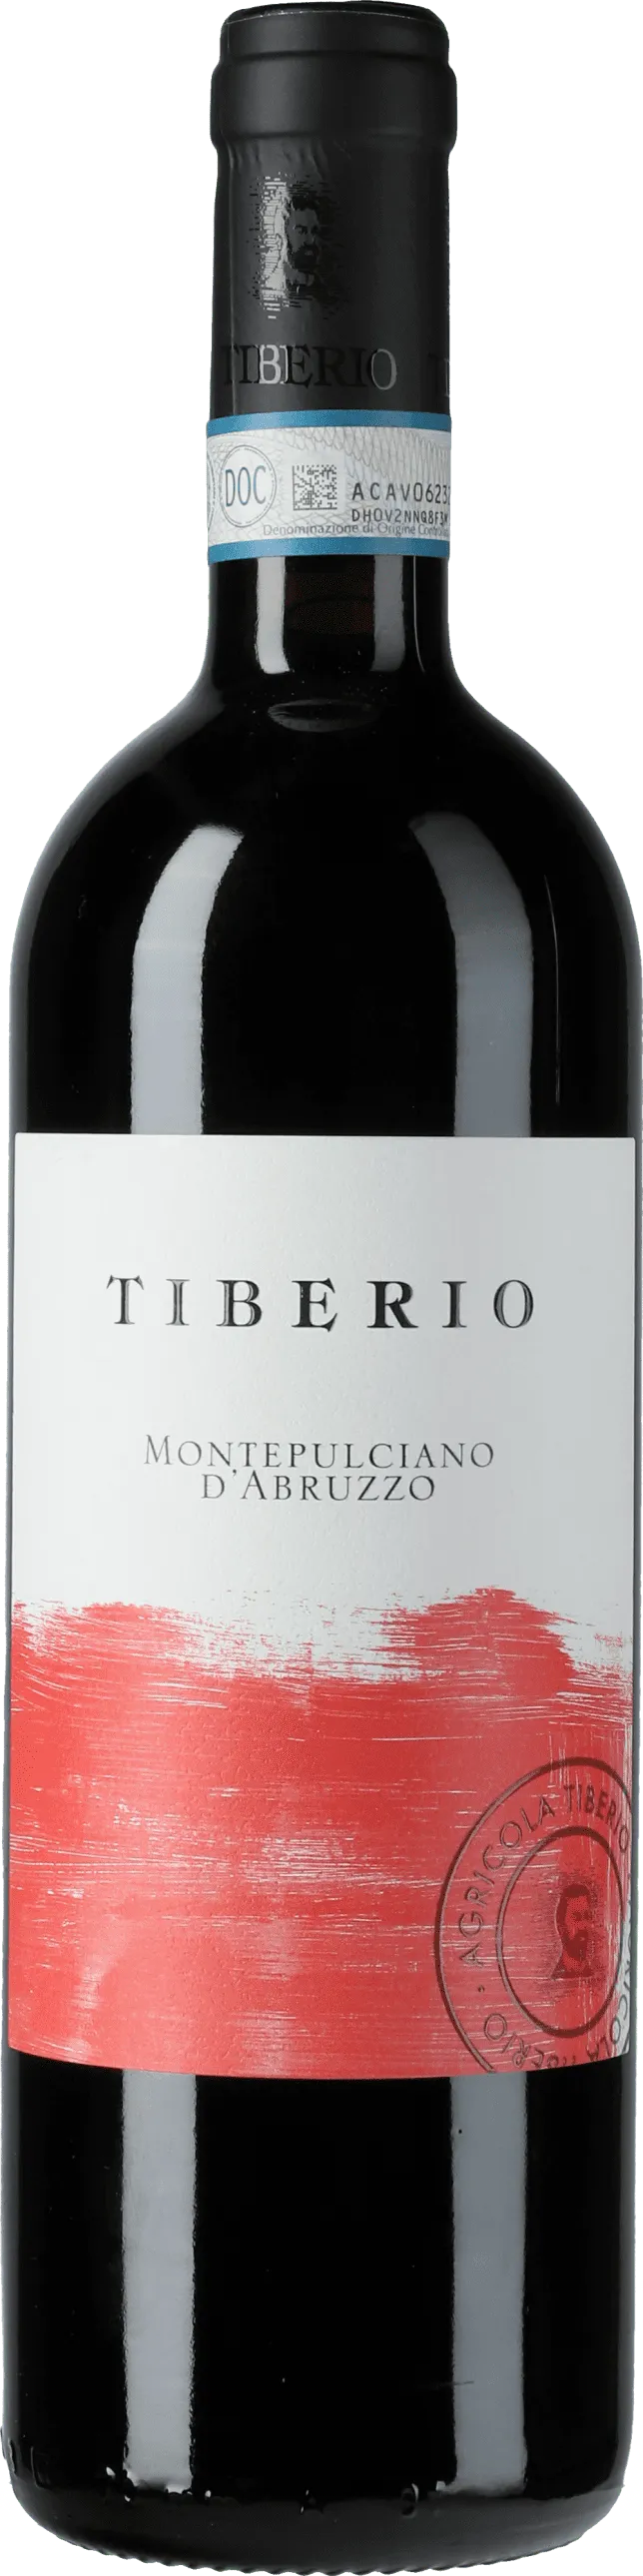 Bottle of Tiberio Montepulciano d'Abruzzo from search results